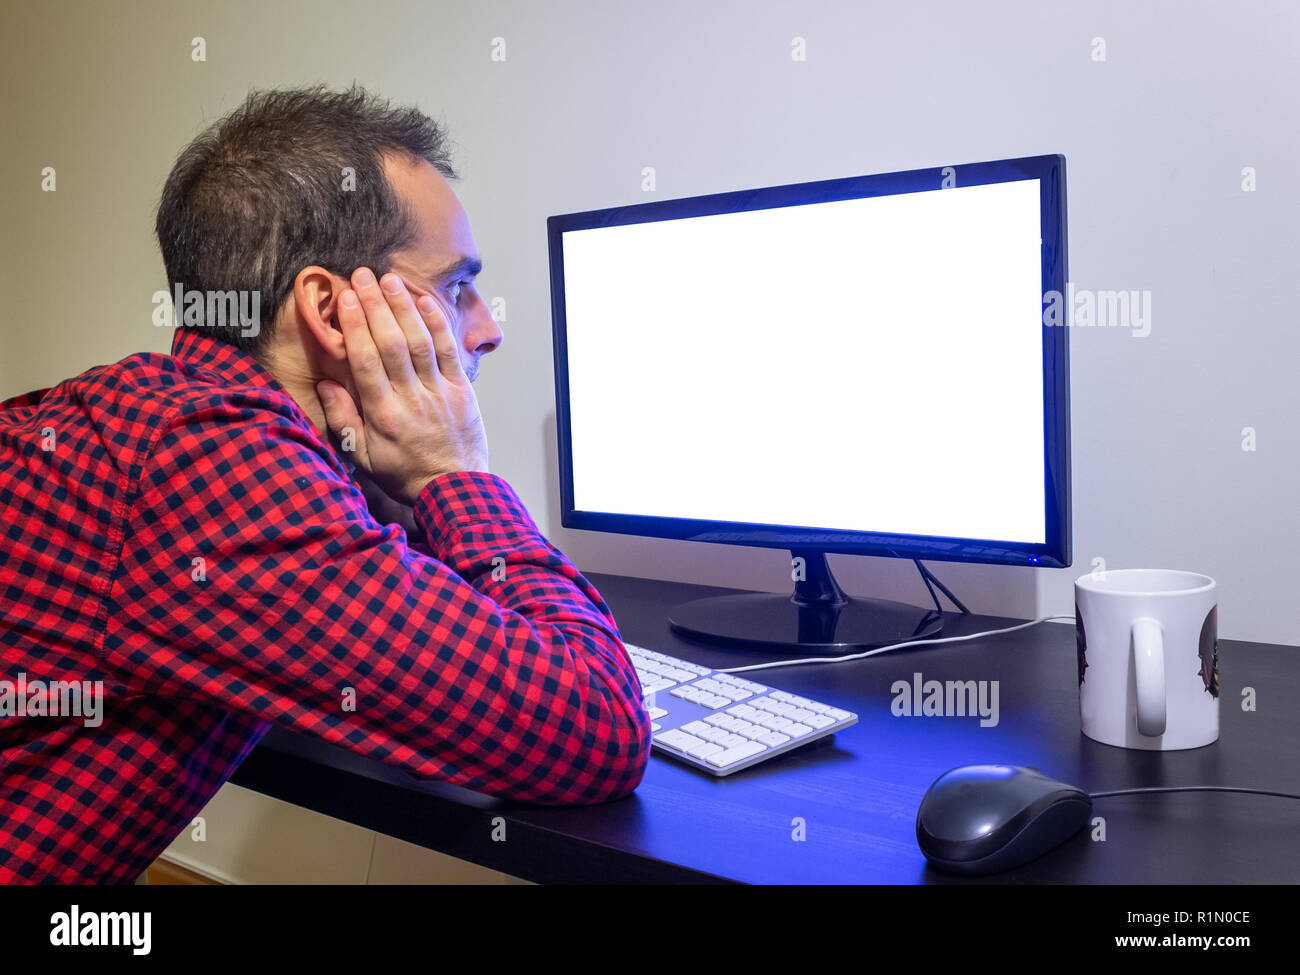 Surprised Man Stares at Office Computer on Wooden Black Desk Mockup. Dotted Red Shirt, LCD Screen, Keyboard, Mouse, White Mug. Copy Space. Stock Photo